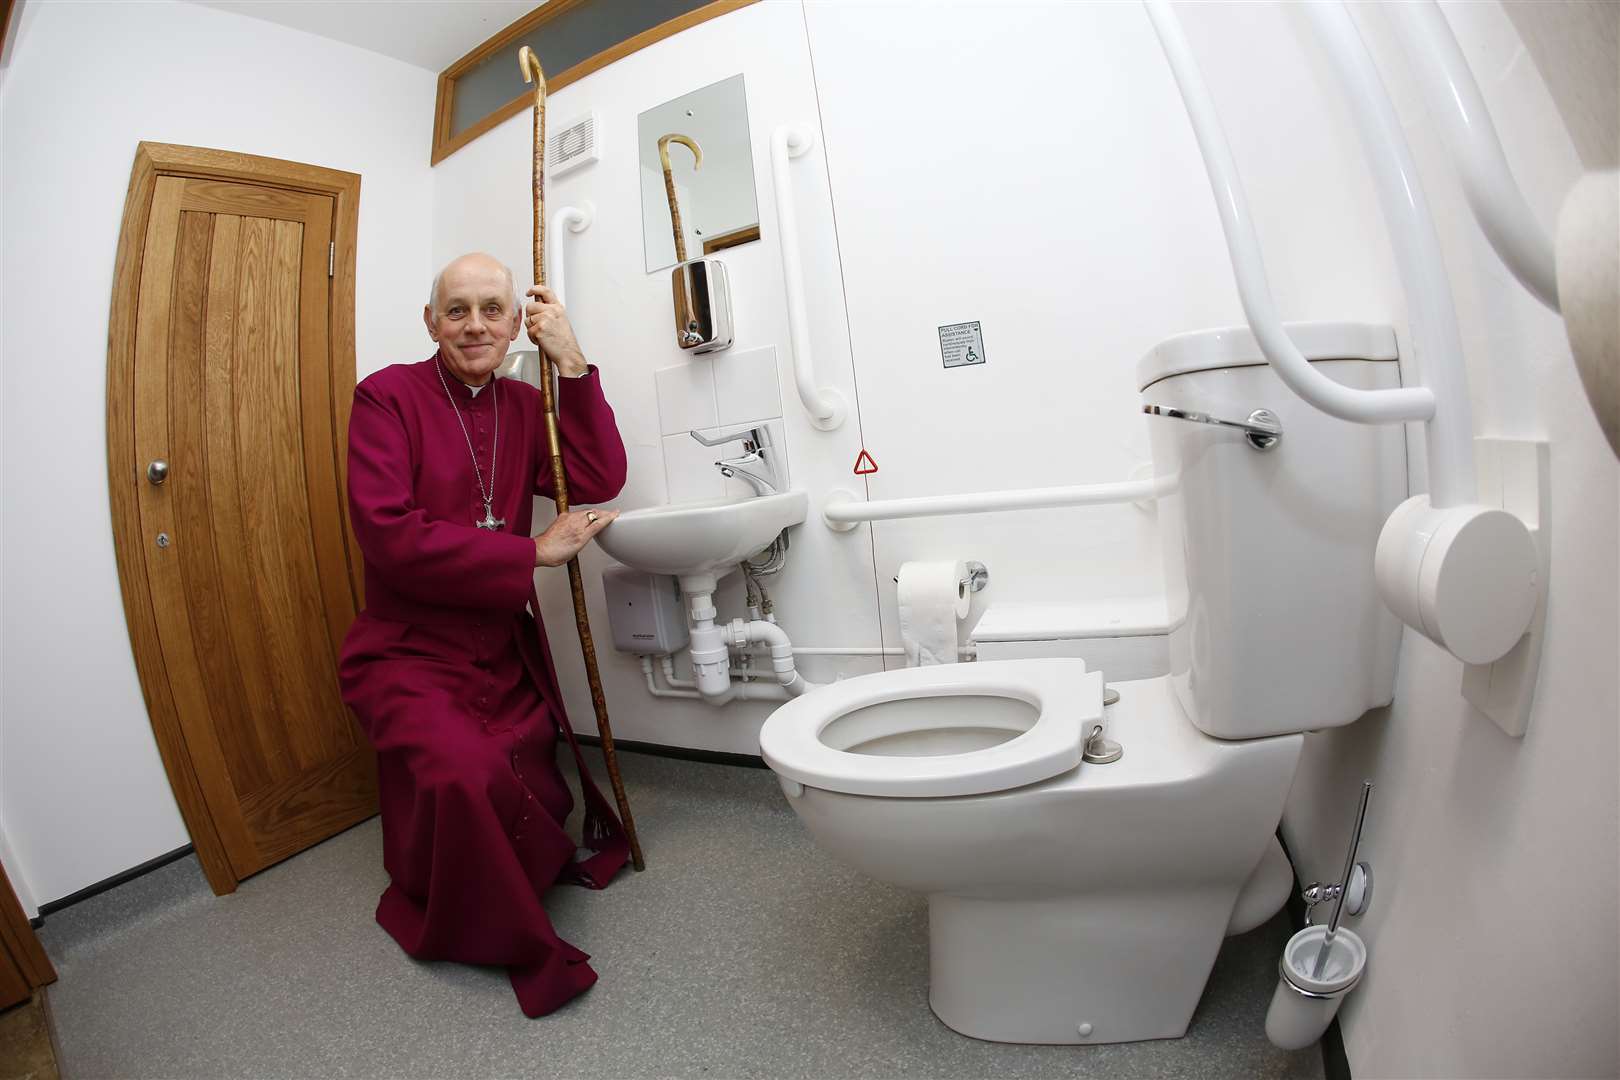 Bishop of Dover Trevor Wilmott blessing the loo at St Mary's Church